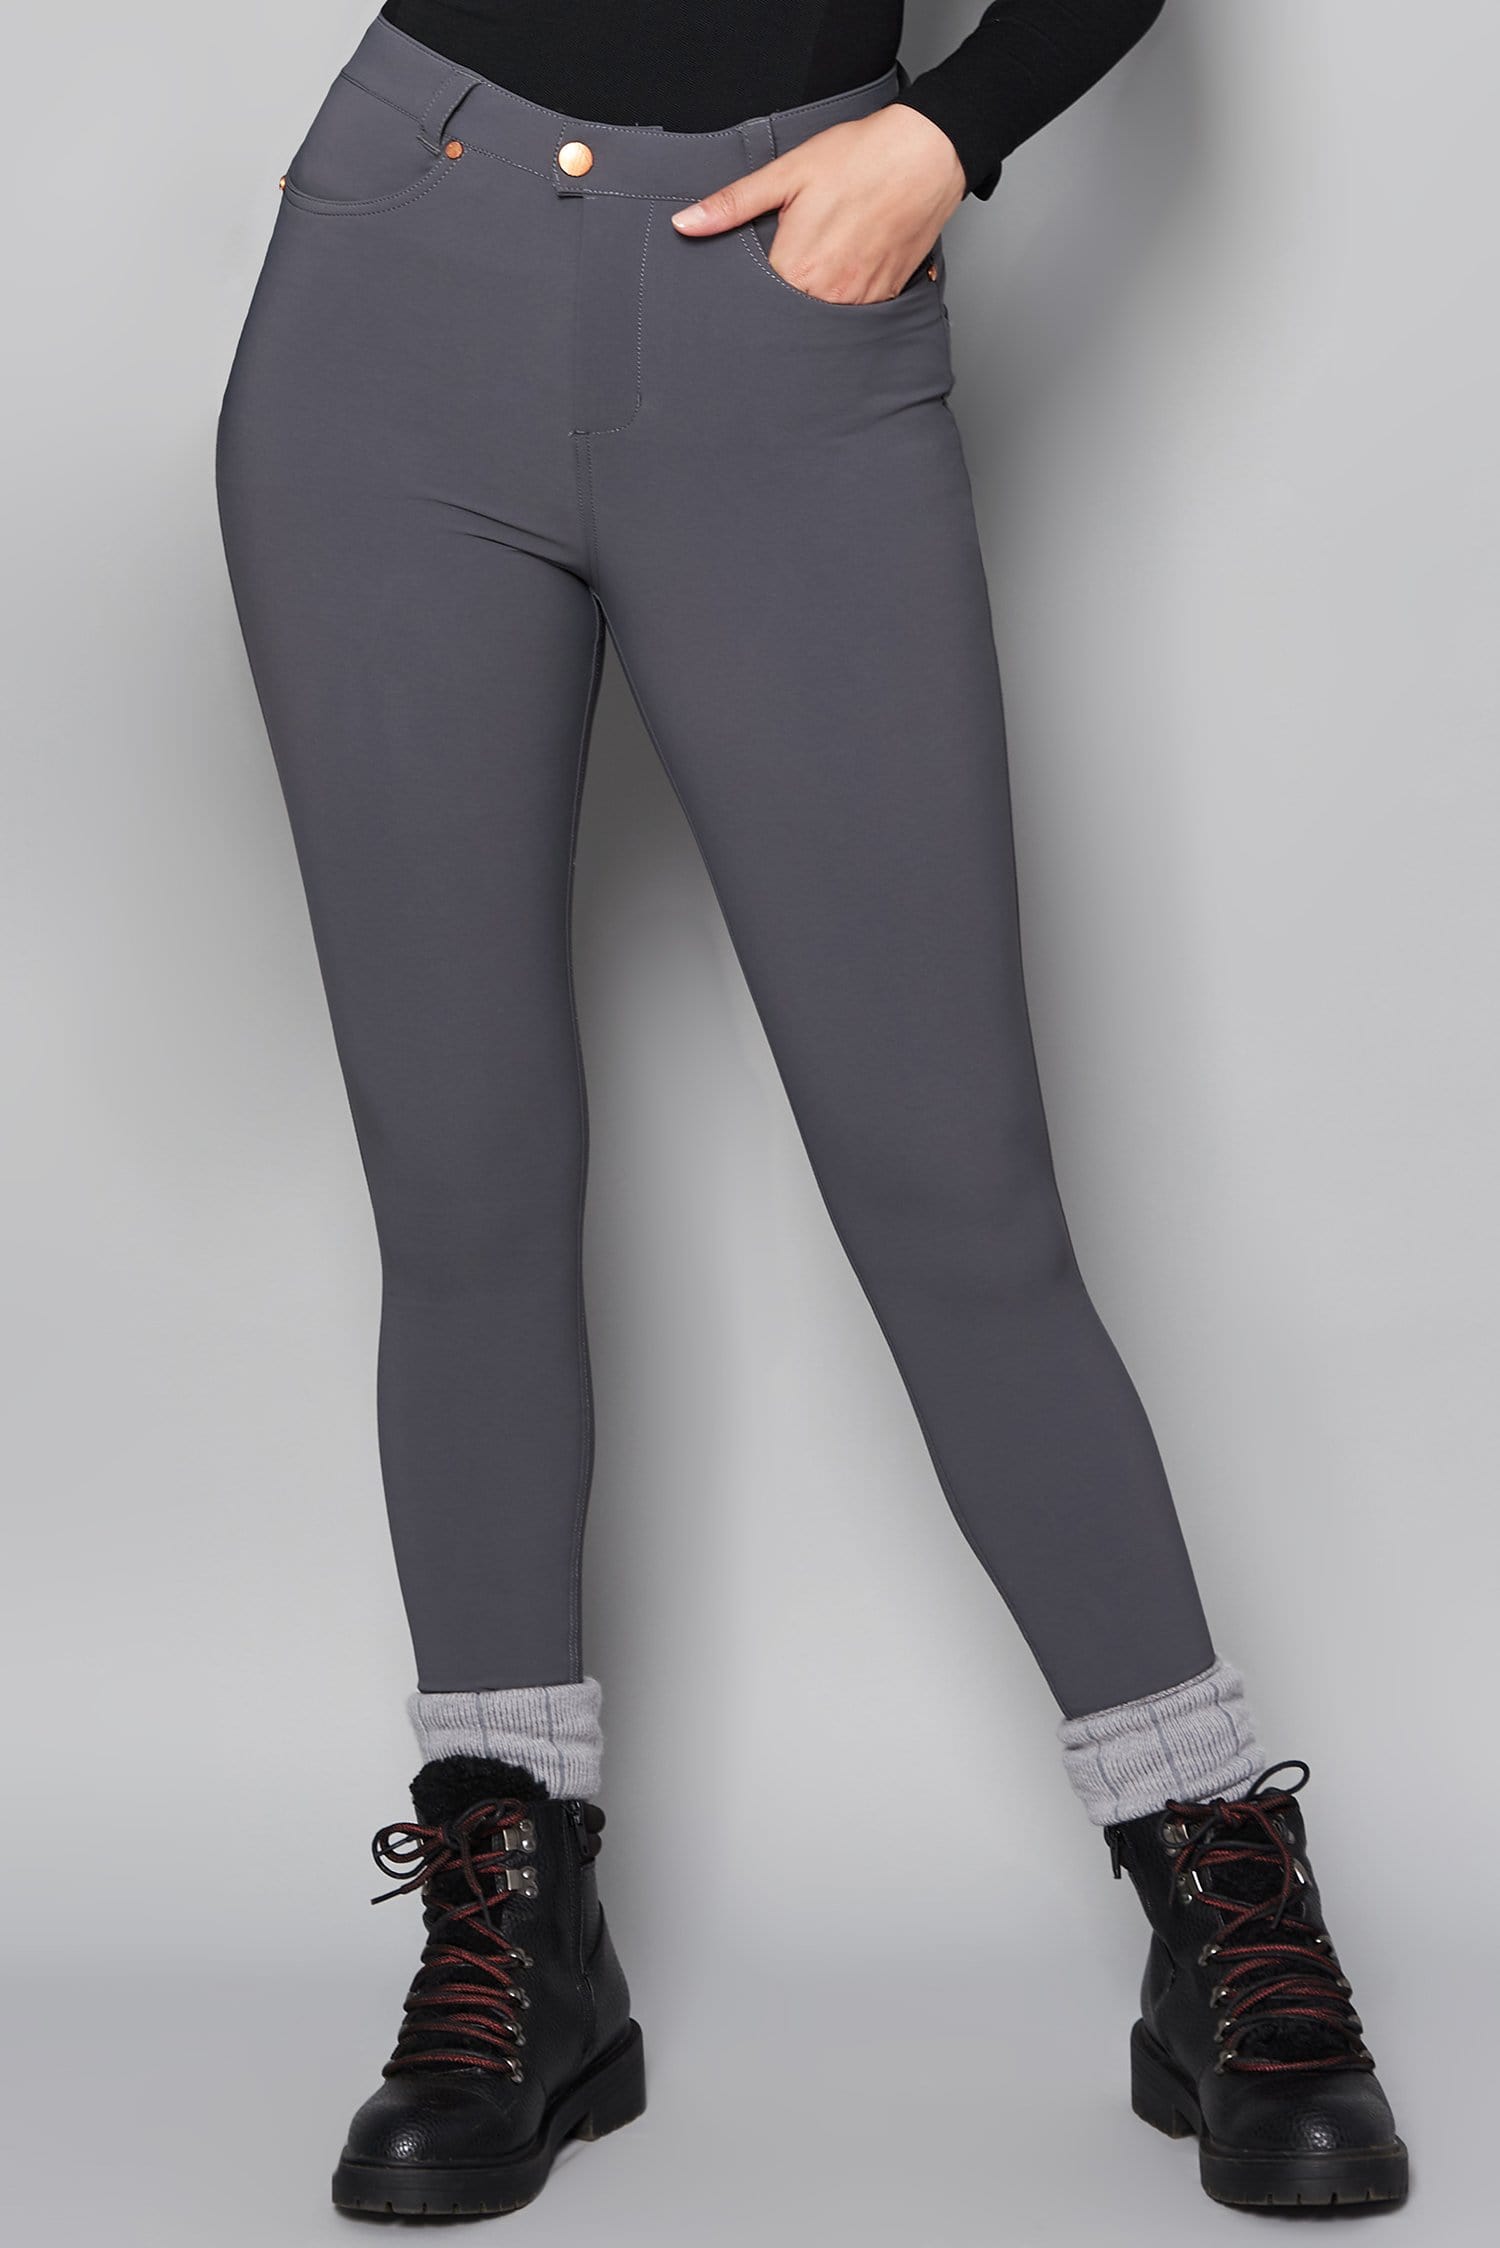 MAX Stretch Skinny Outdoor Water Resistant Pants Graphite